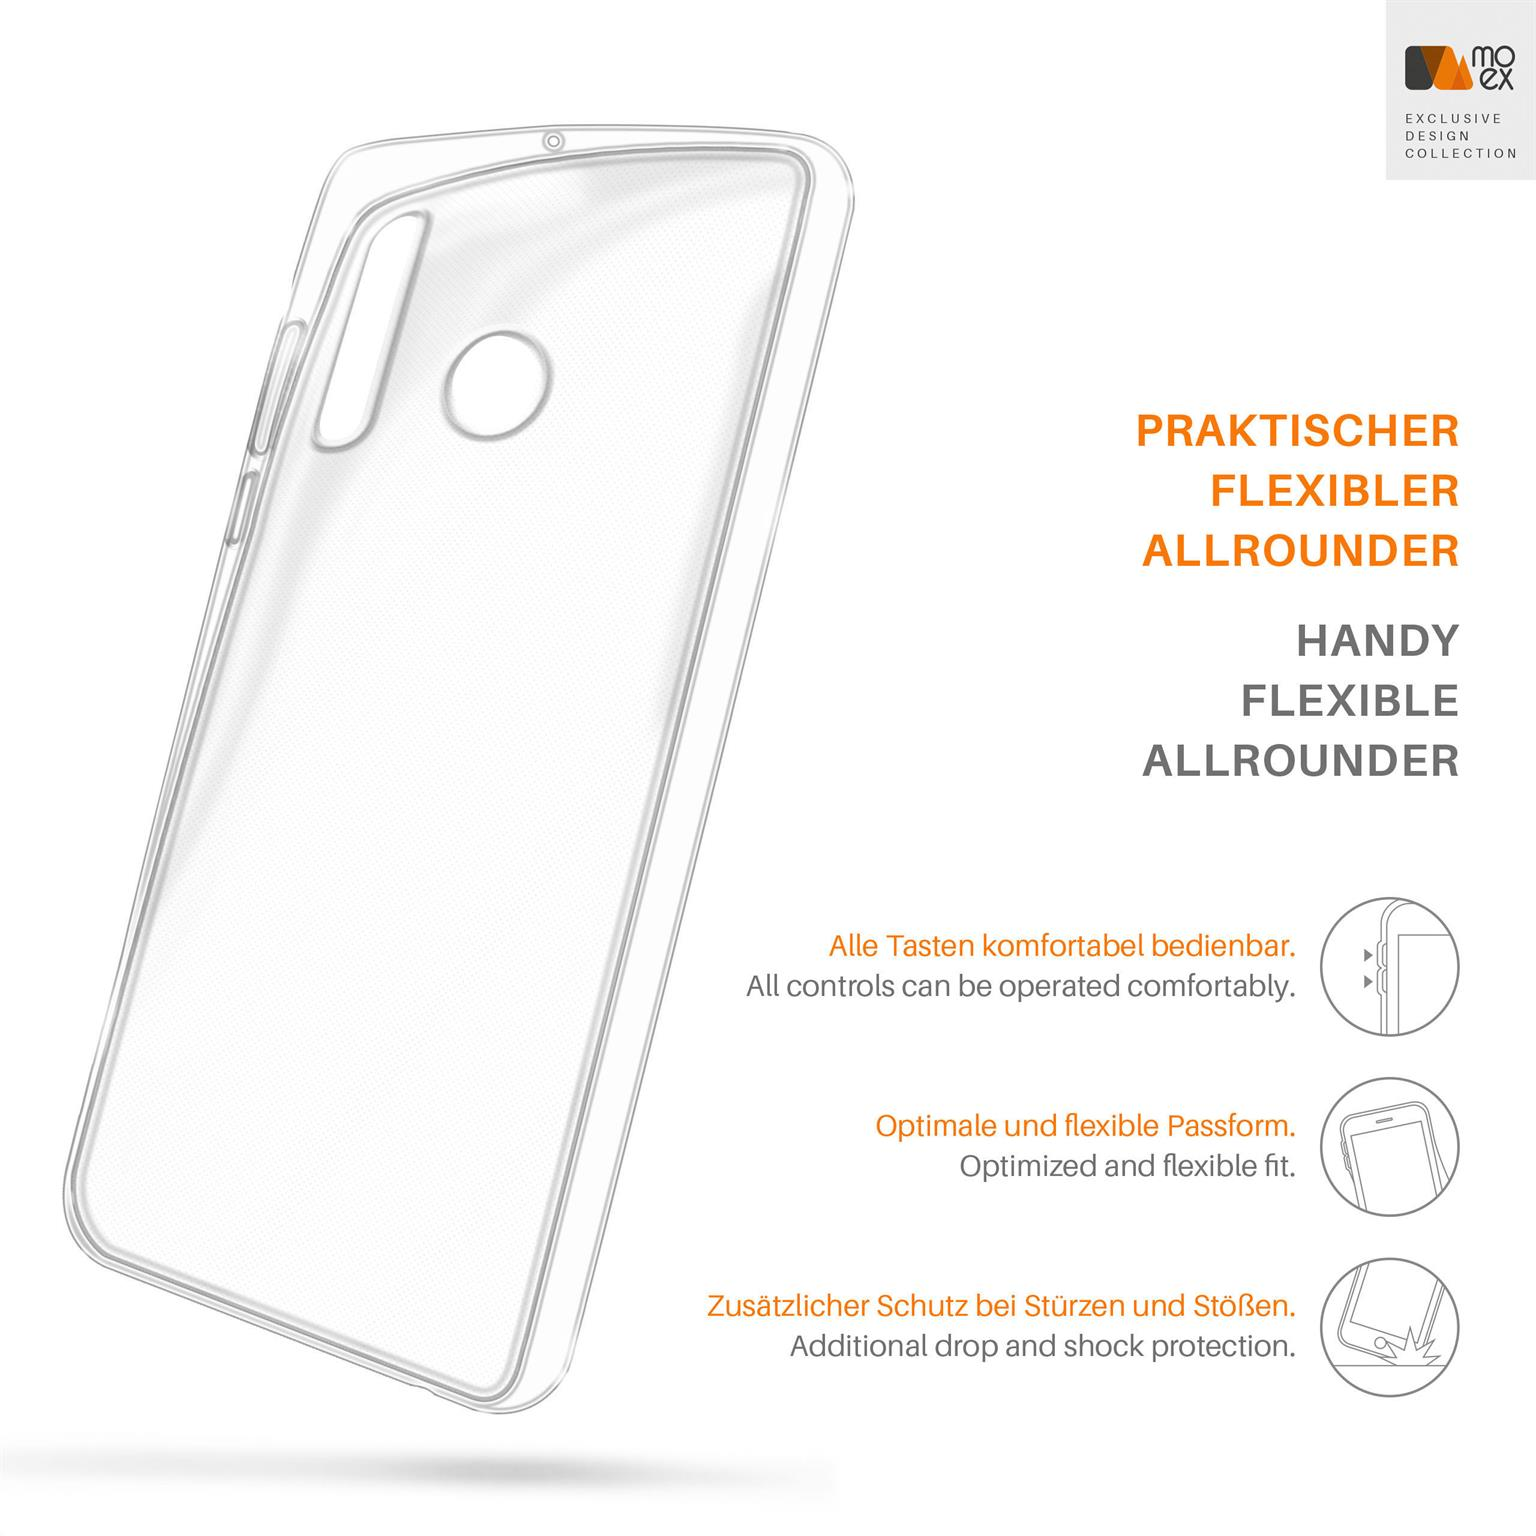 smart 2019, Backcover, Plus Huawei, MOEX Case, Aero Crystal-Clear P